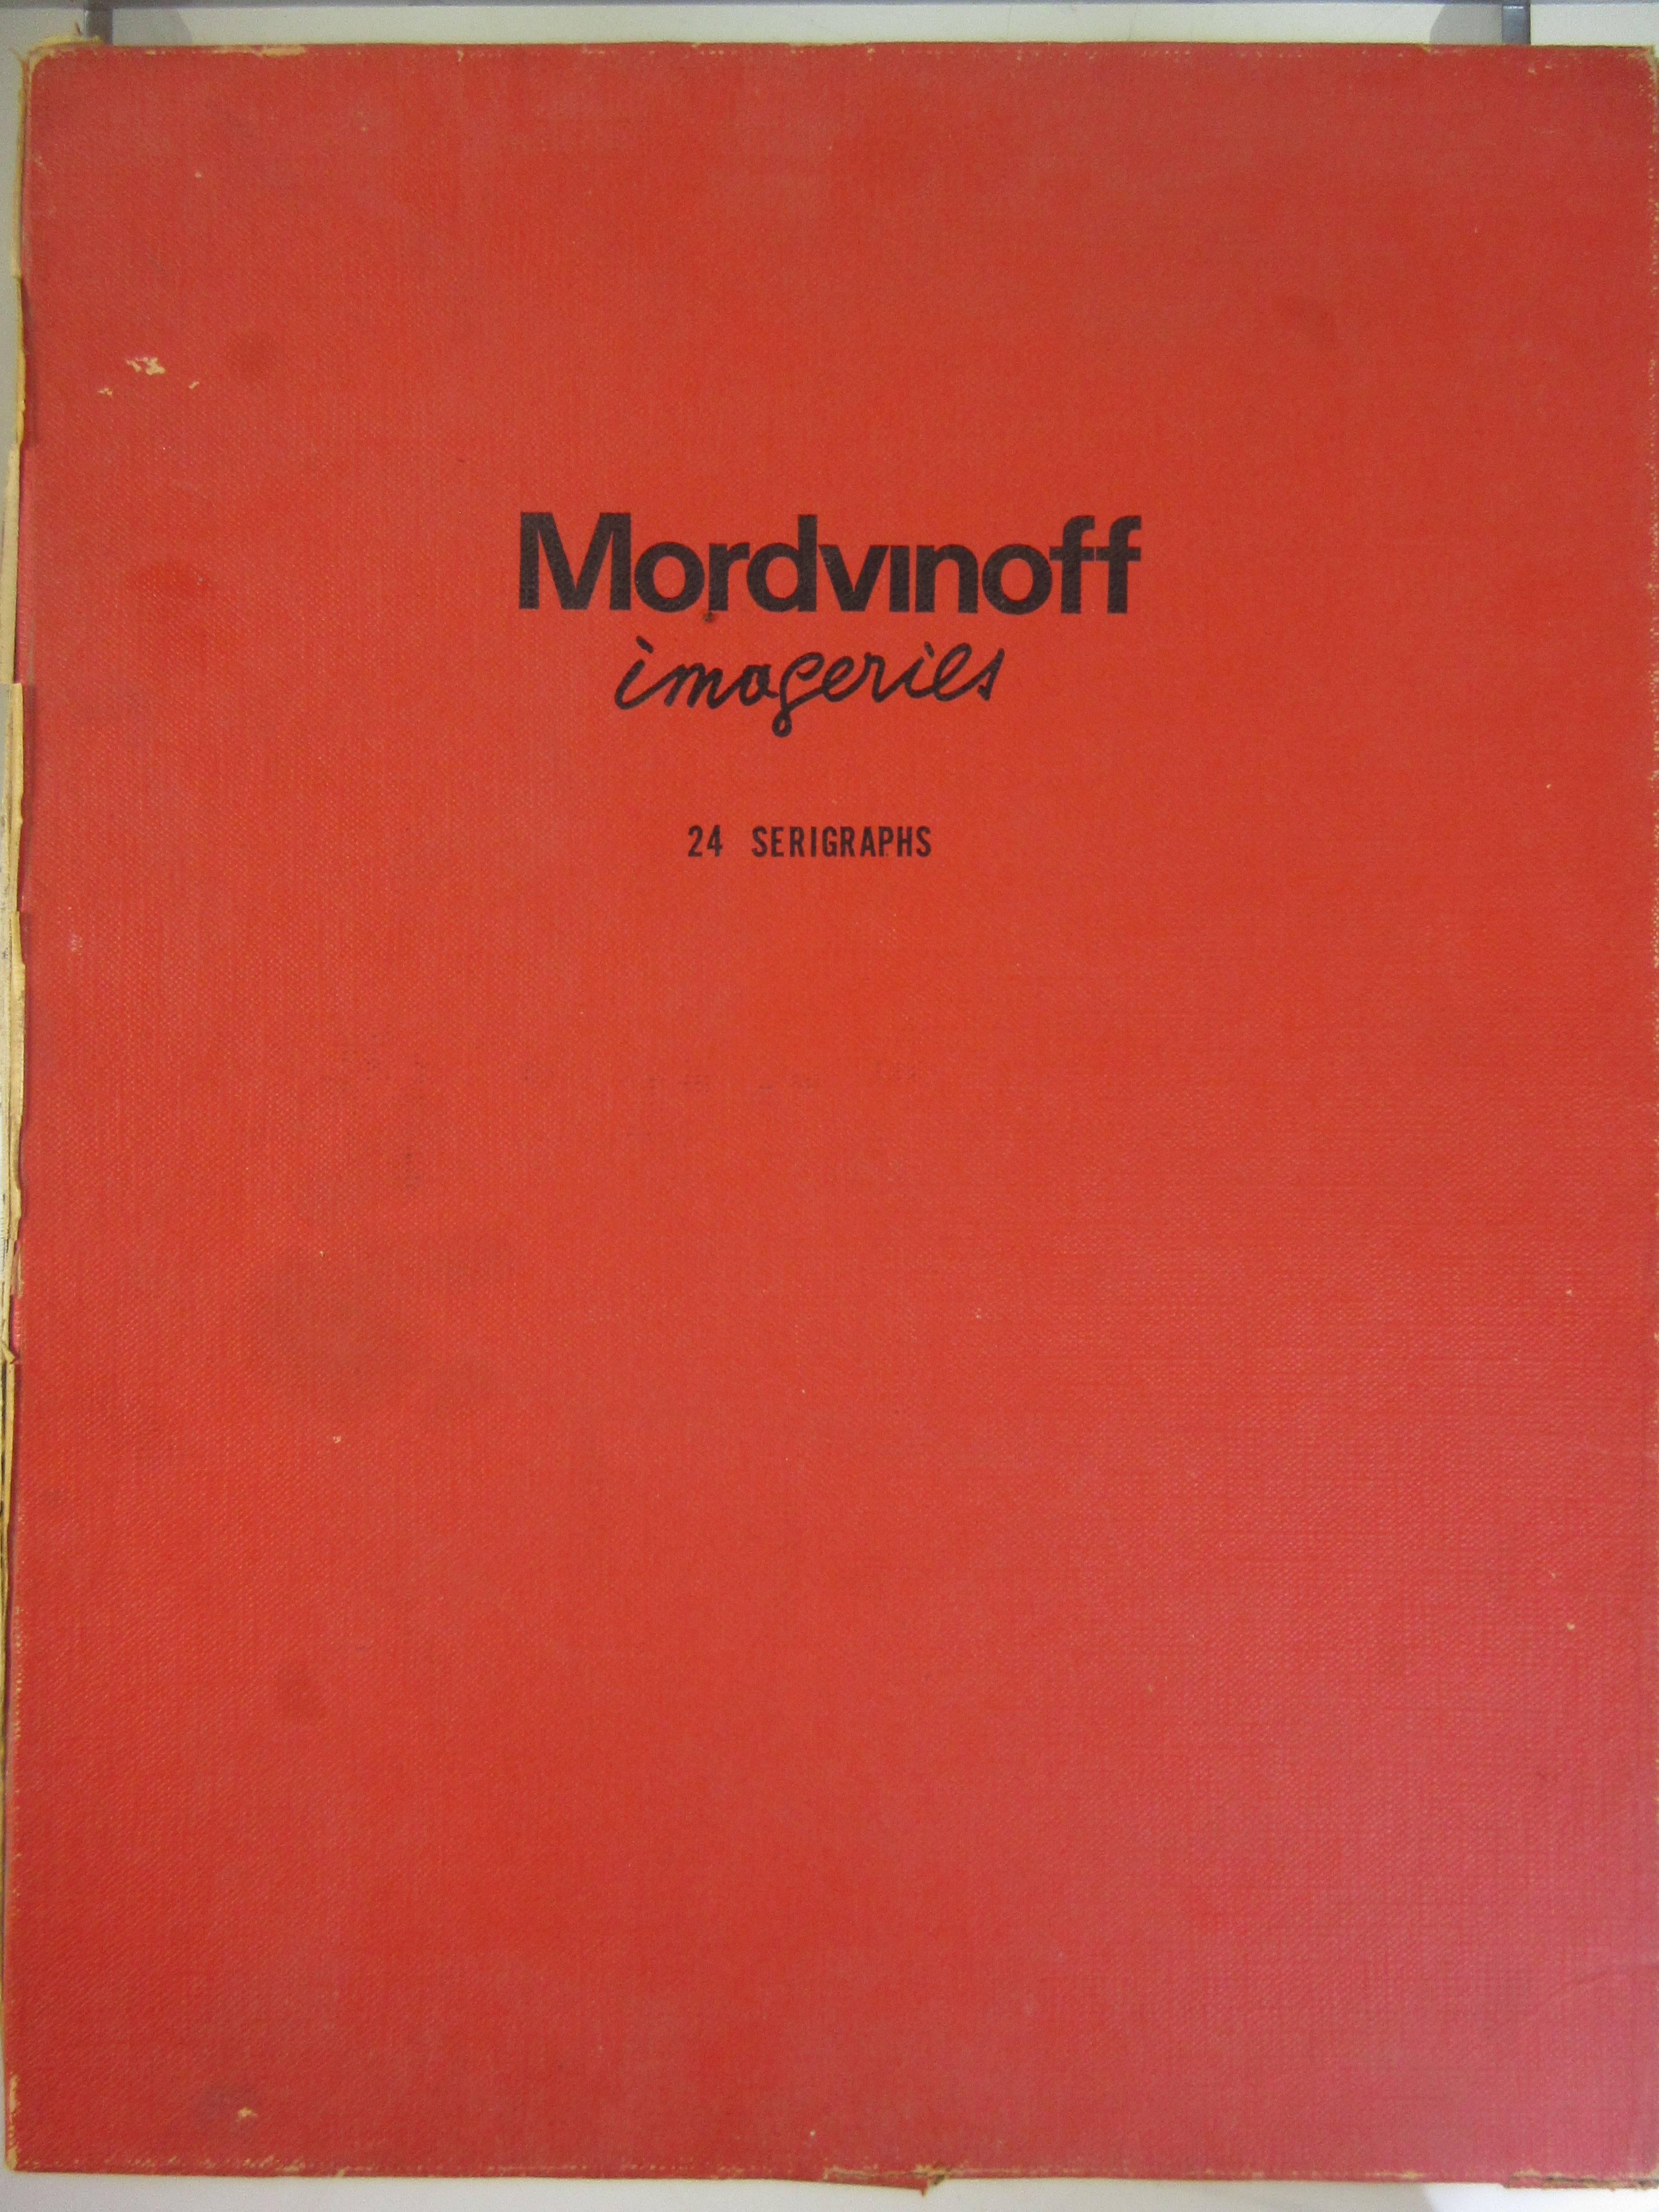 This rare portfolio by Mordinoff from the 1970s contains 24 limited edition original prints of a highly stylized erotic nature. Mordvinoff born in St. Petersburg Russia in 1911 studied with Ferdinand Leger in Paris and lived many years in the South